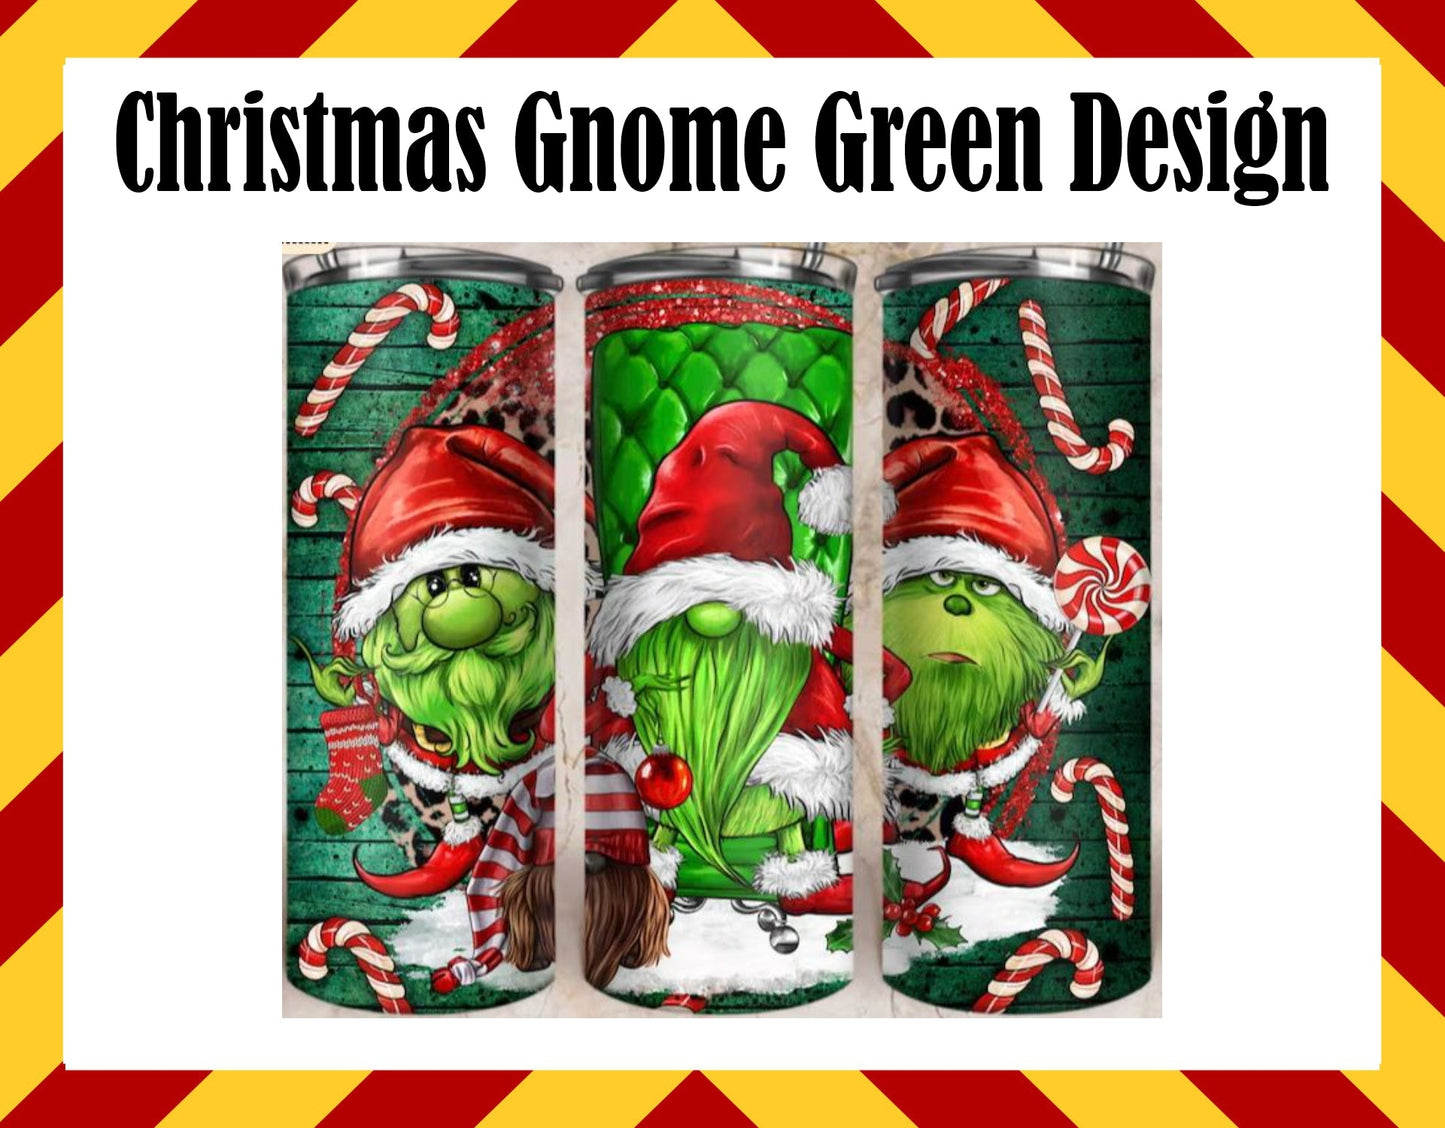 Stainless Steel Hot/Cold Cup - CHRISTMAS DESIGNS